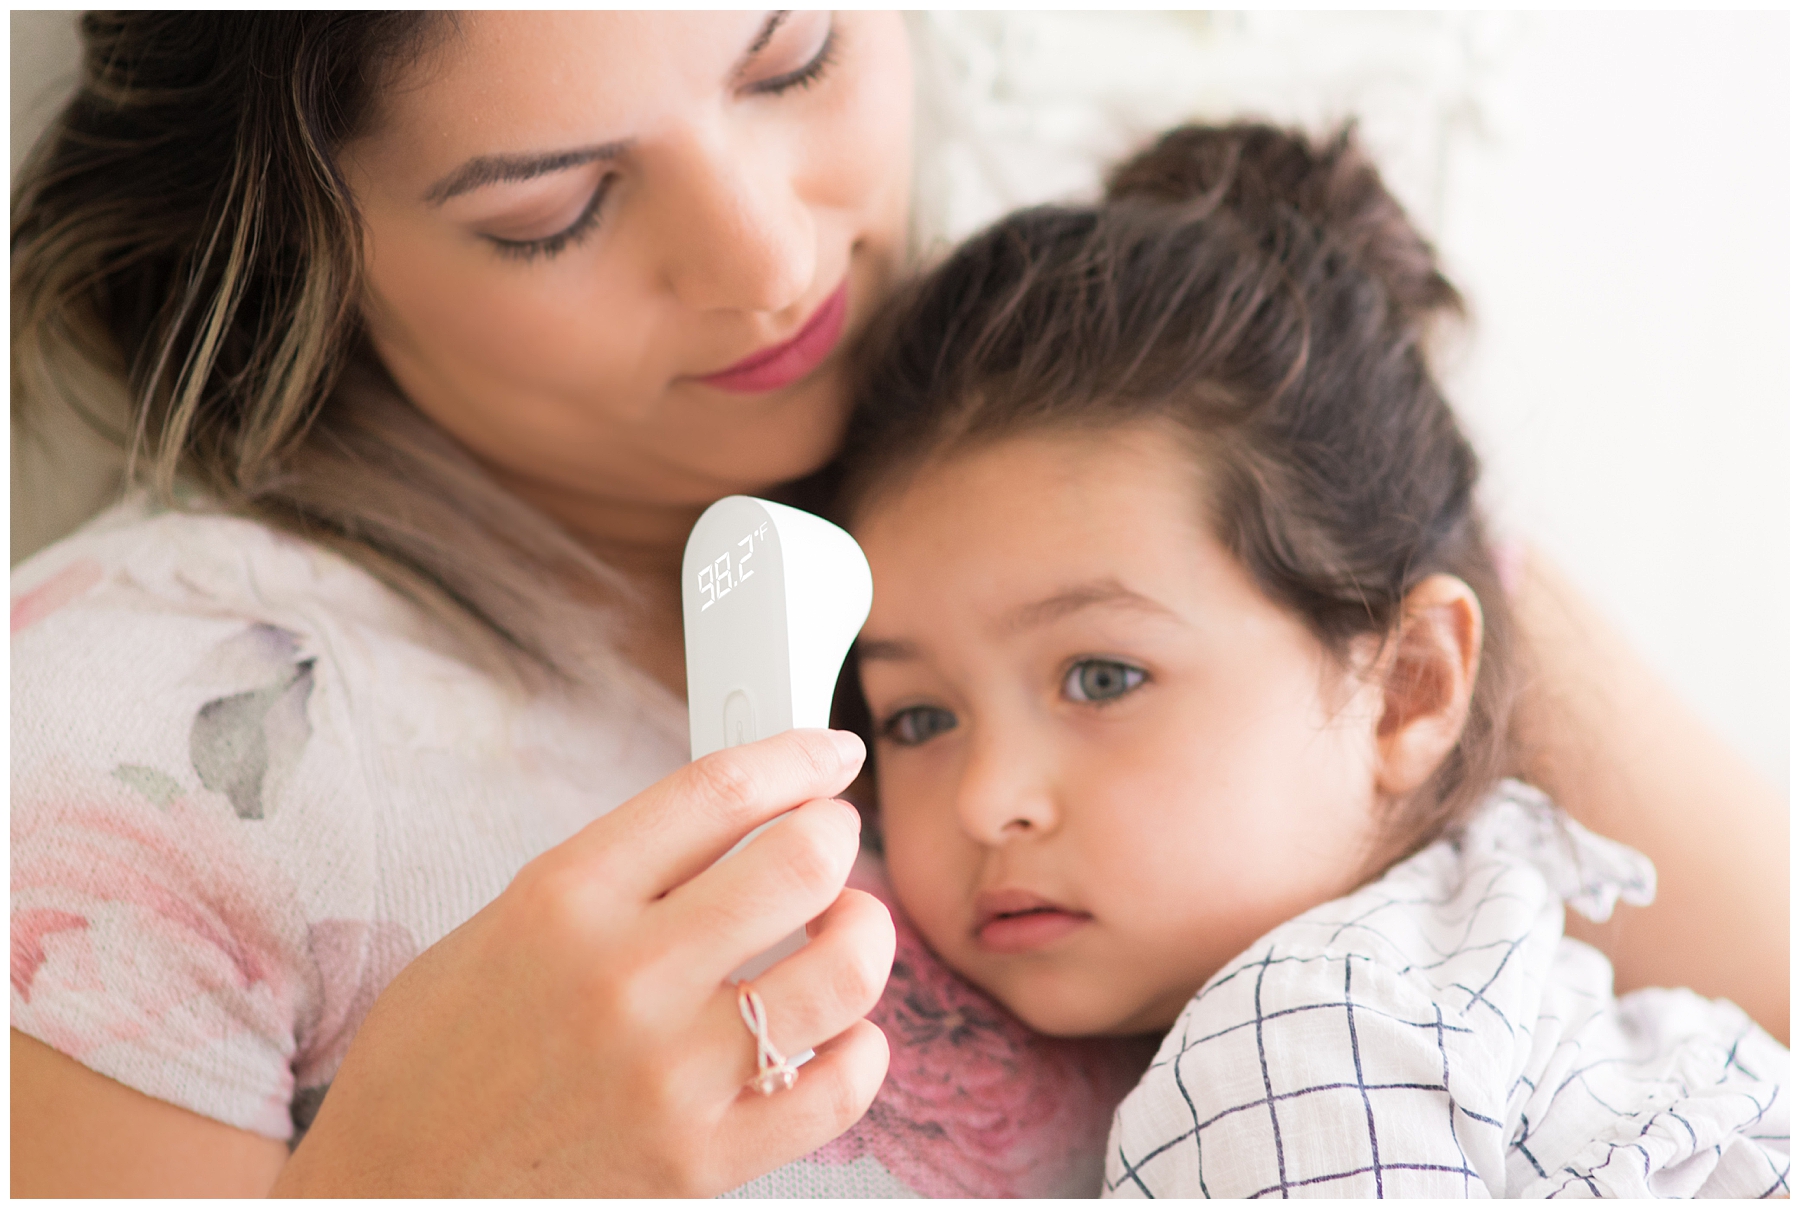 iHealth Forehead Thermometer, Infrared Baby Thermometer for Best Accuracy with 3 Ultra Sensitive Sensors,Medical Digital Fever Thermometer with New Algorithm,Instant Reading for Baby Kids and Adults, Commerical Photographer, Lauren Ryan Photography, Picture Marvelous Photography, 